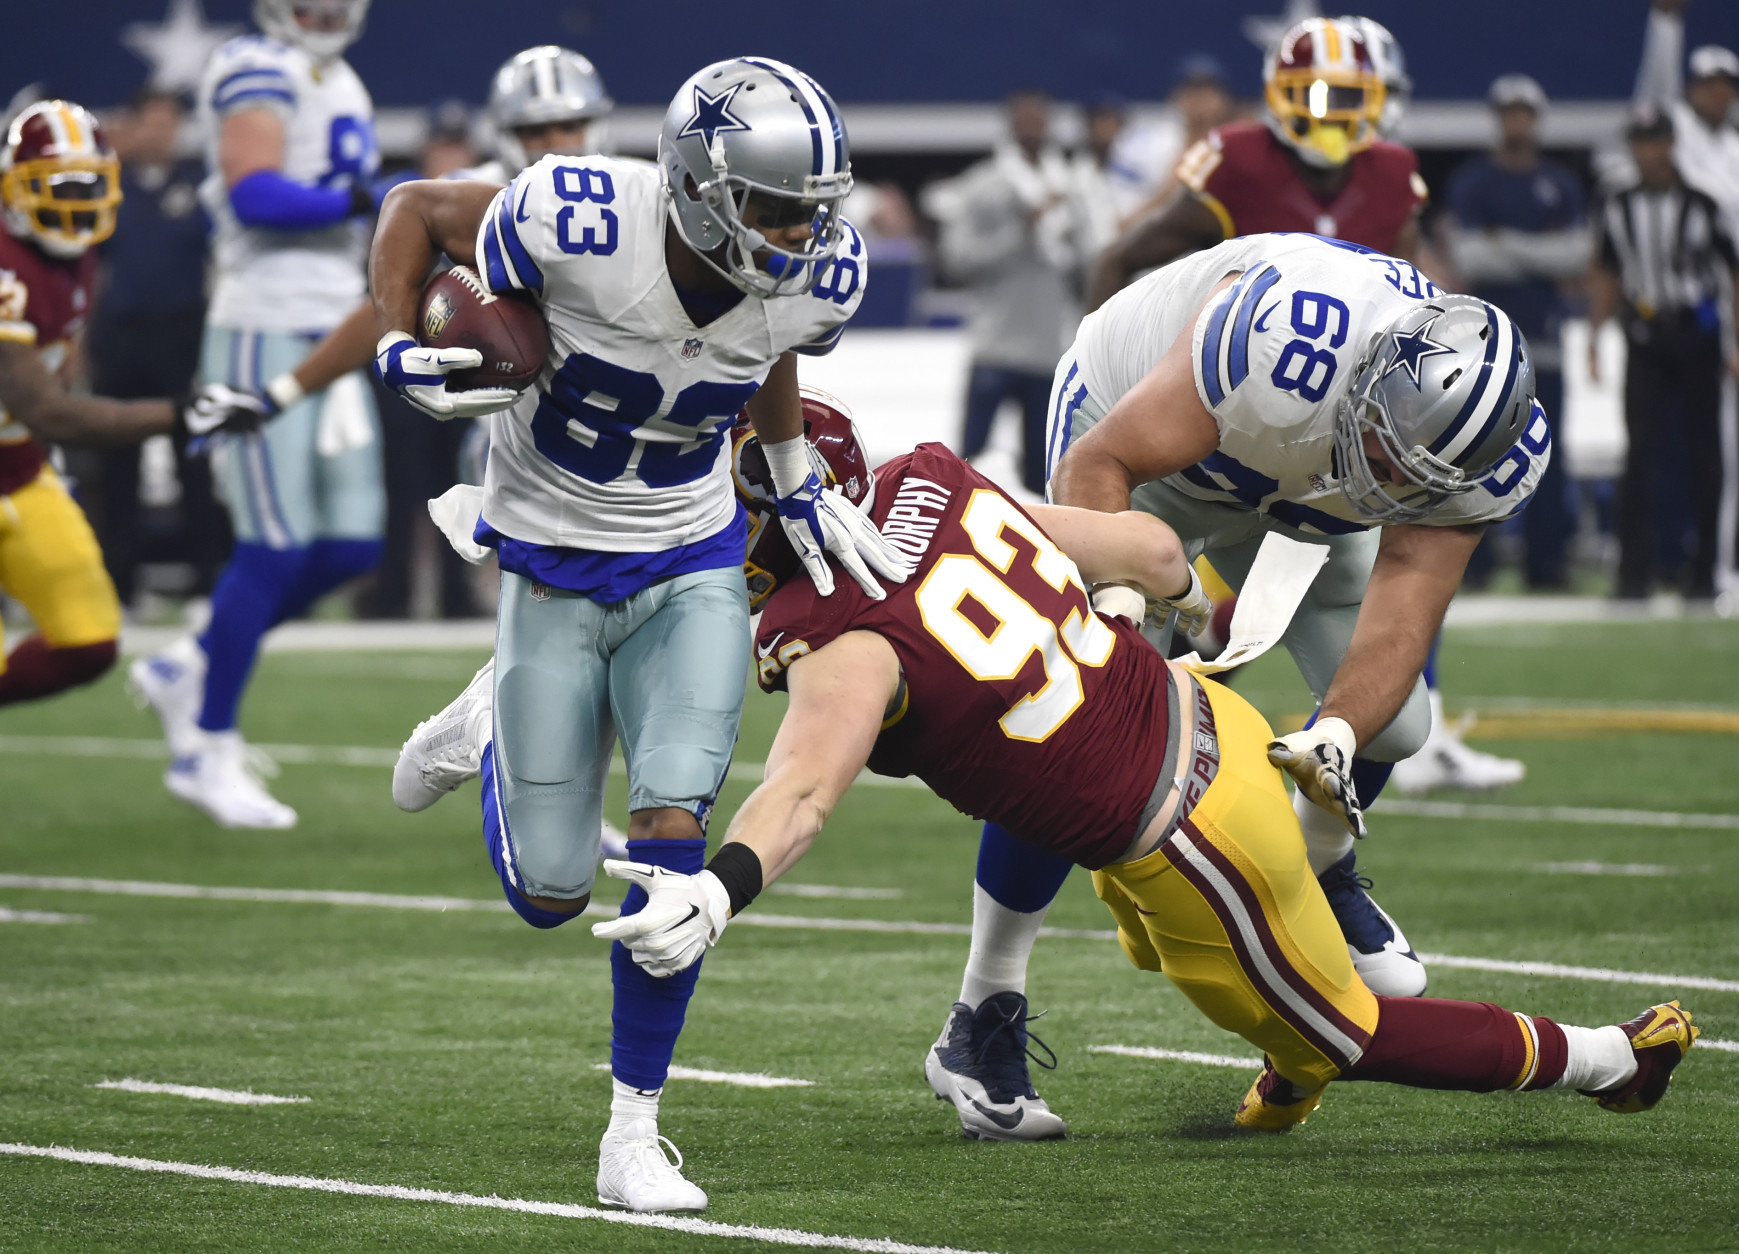 Dallas Cowboys wide receiver Terrance Williams (83) fights off a tackle-attempt by Washington Redskins outside linebacker Trent Murphy (93) with help from teammate Doug Free (68) while gaining yardage after catching a pass in the first half of an NFL football game, Sunday, Jan. 3, 2016, in Arlington, Texas. (AP Photo/Michael Ainsworth)